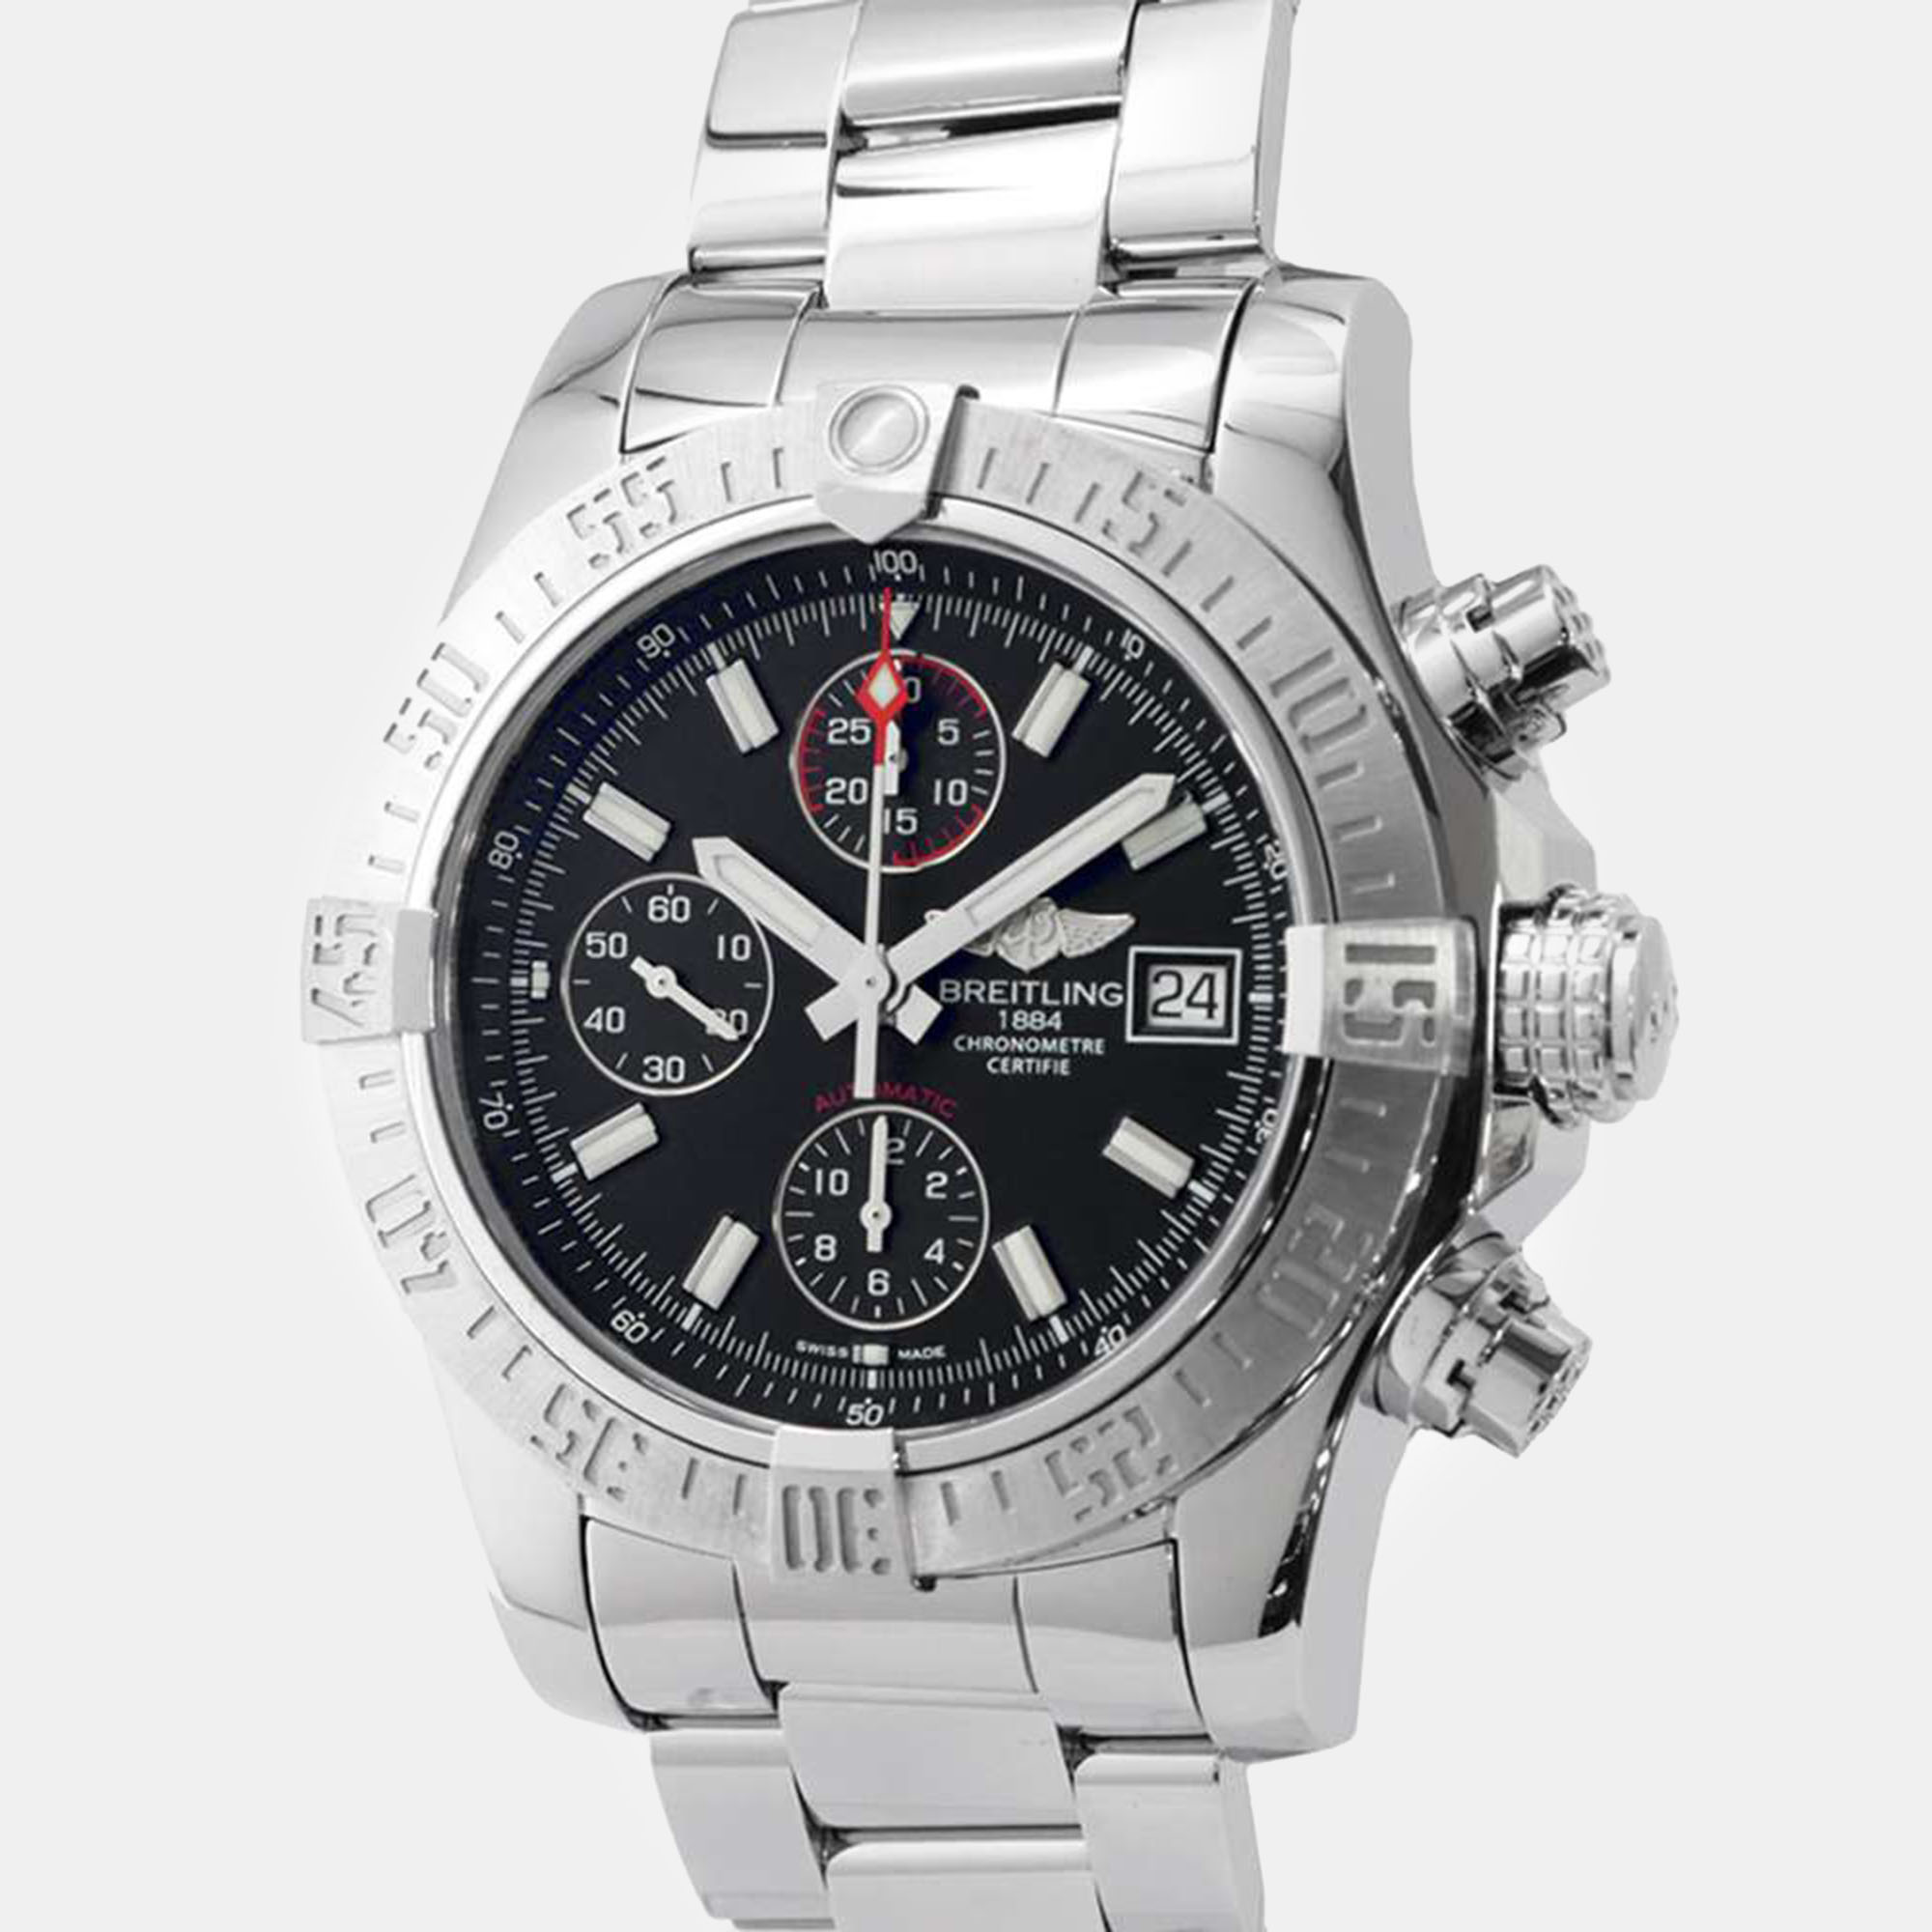 Breitling black stainless steel avenger ii a1338111/bc32 automatic men's wristwatch 43 mm